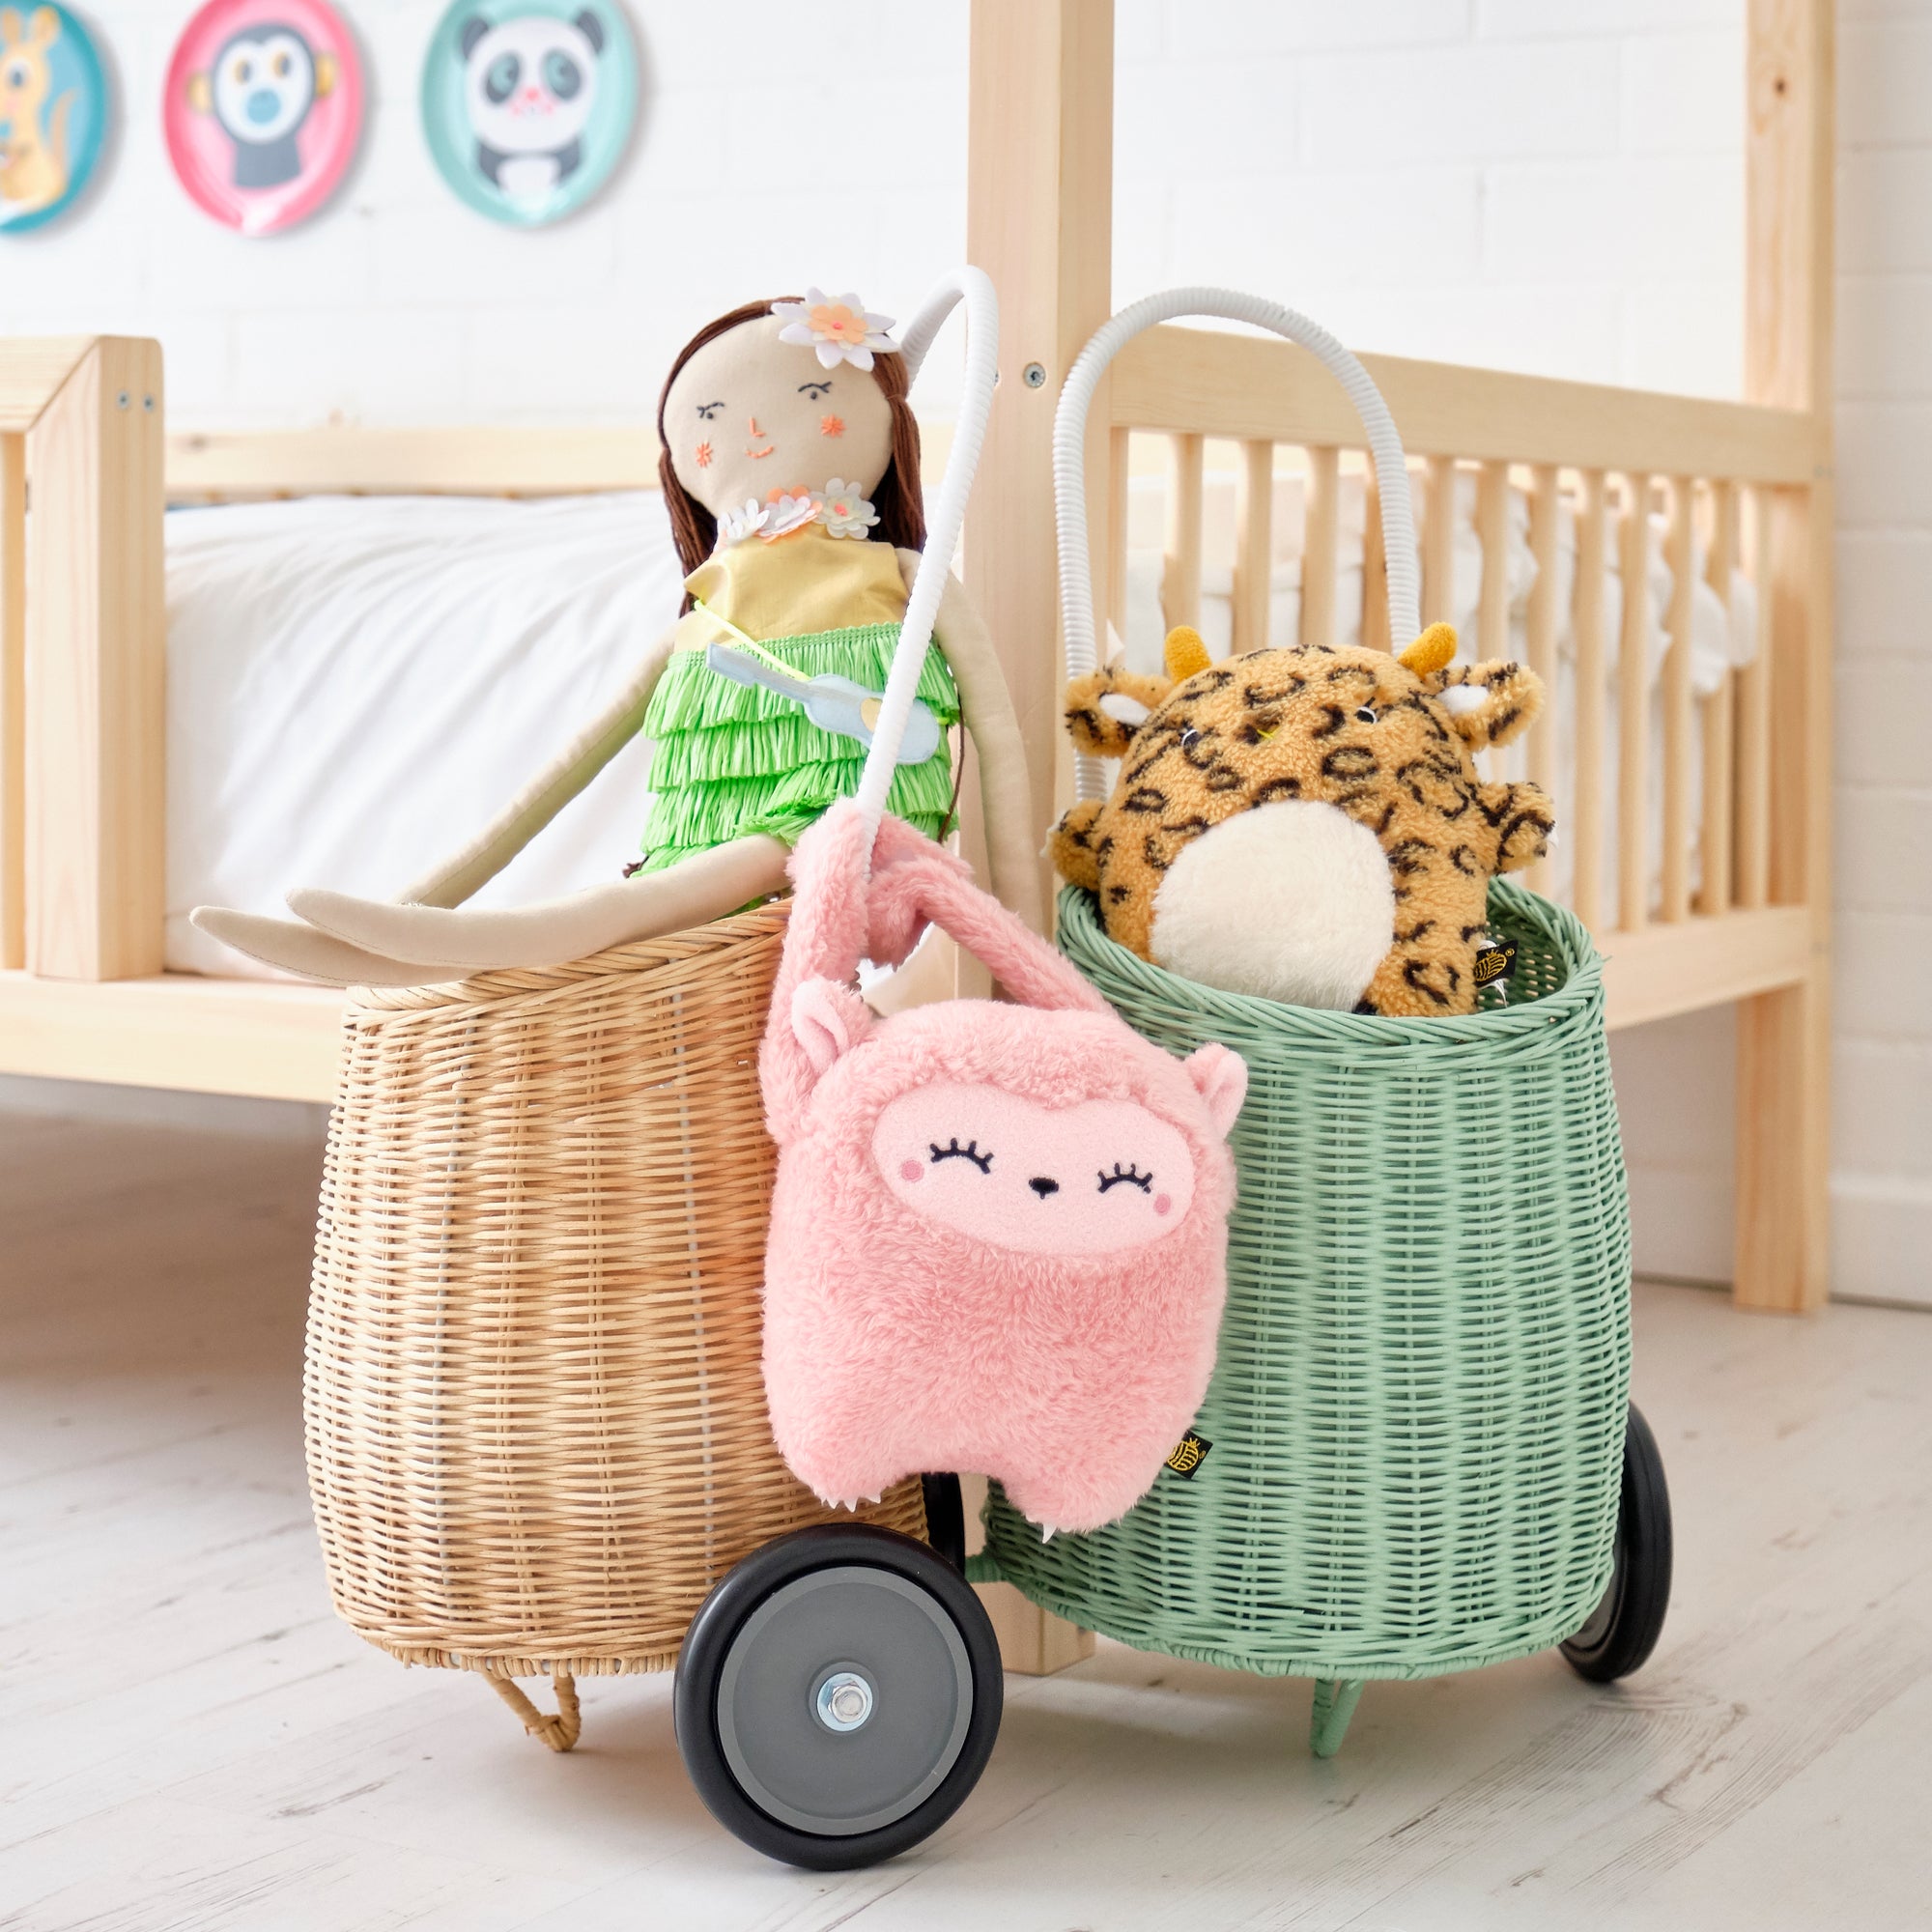 Olli Ella Luggy Baskets and Soft Toys, styled by Bobby Rabbit.